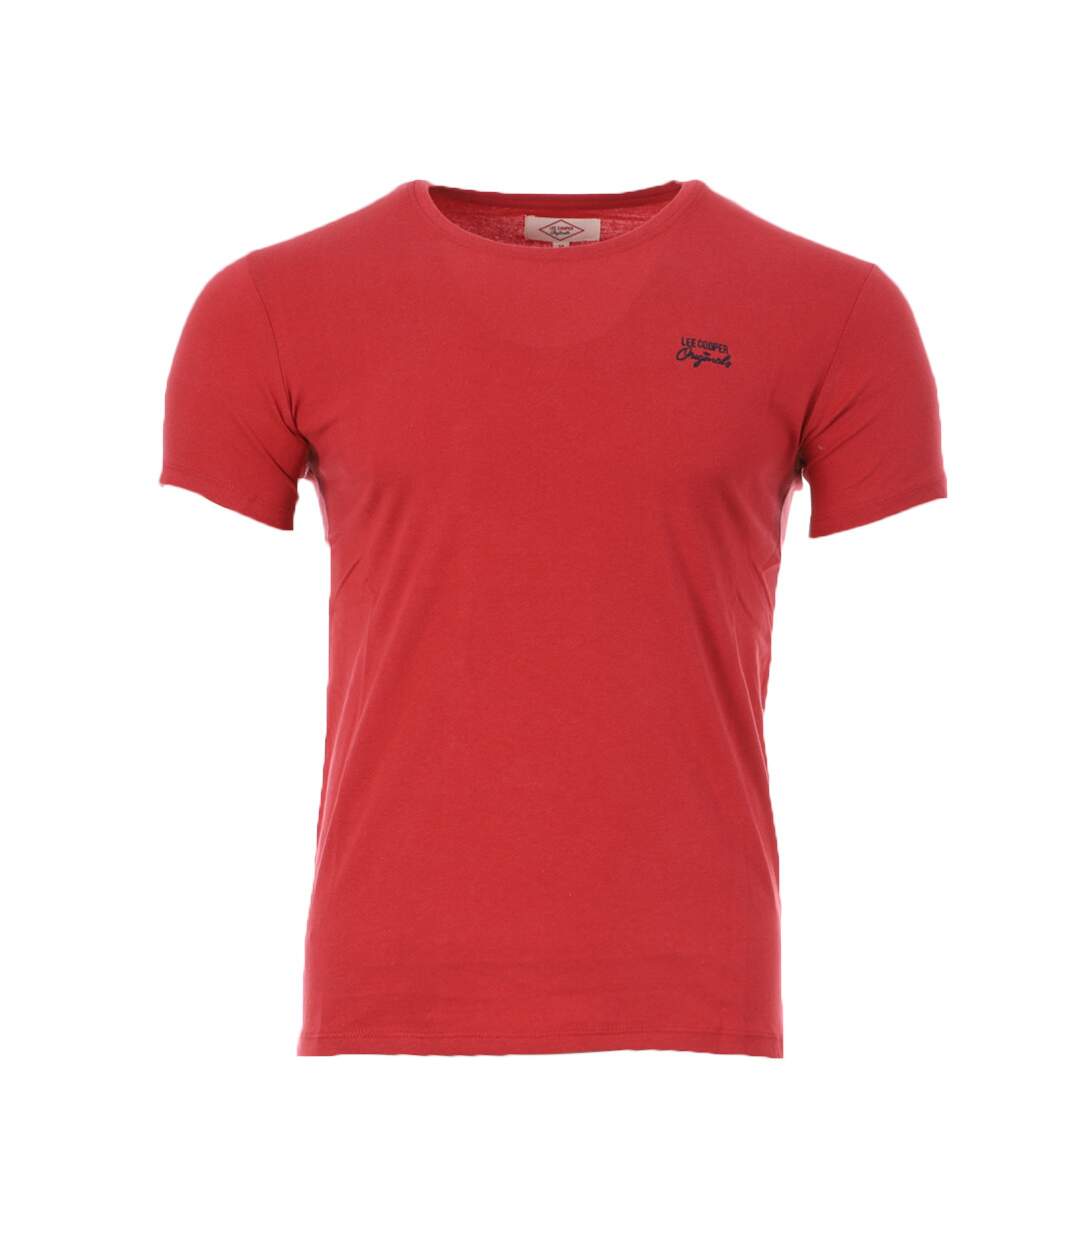 T-shirt Rouge Homme Lee Cooper Oslo